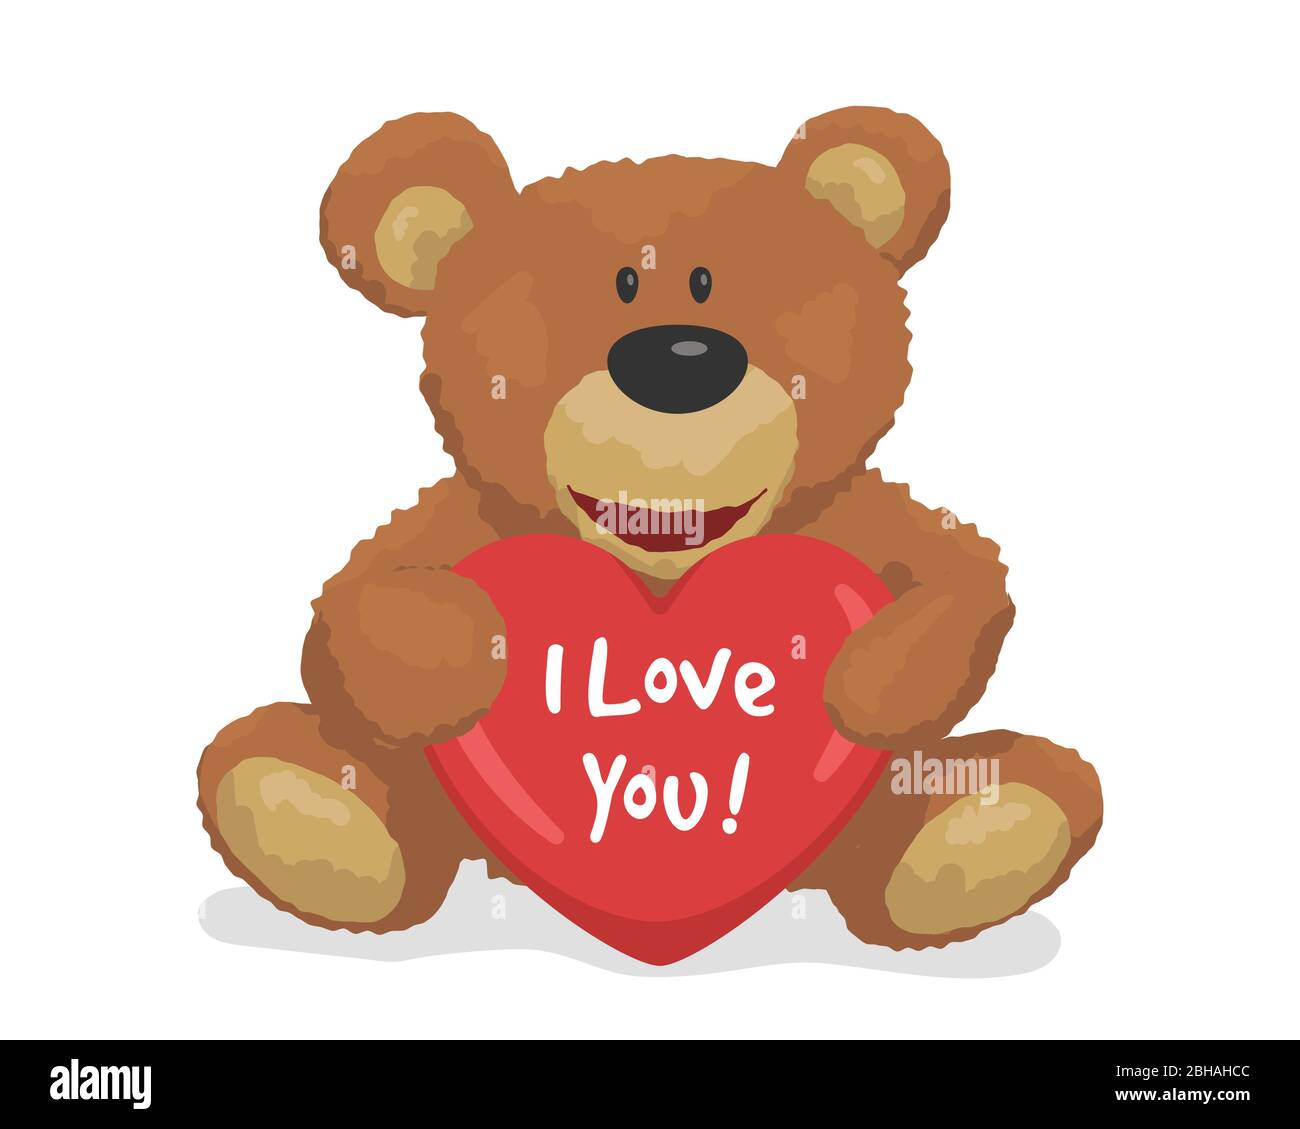 Cute teddy bear with a heart. I love you. Design element greeting ...